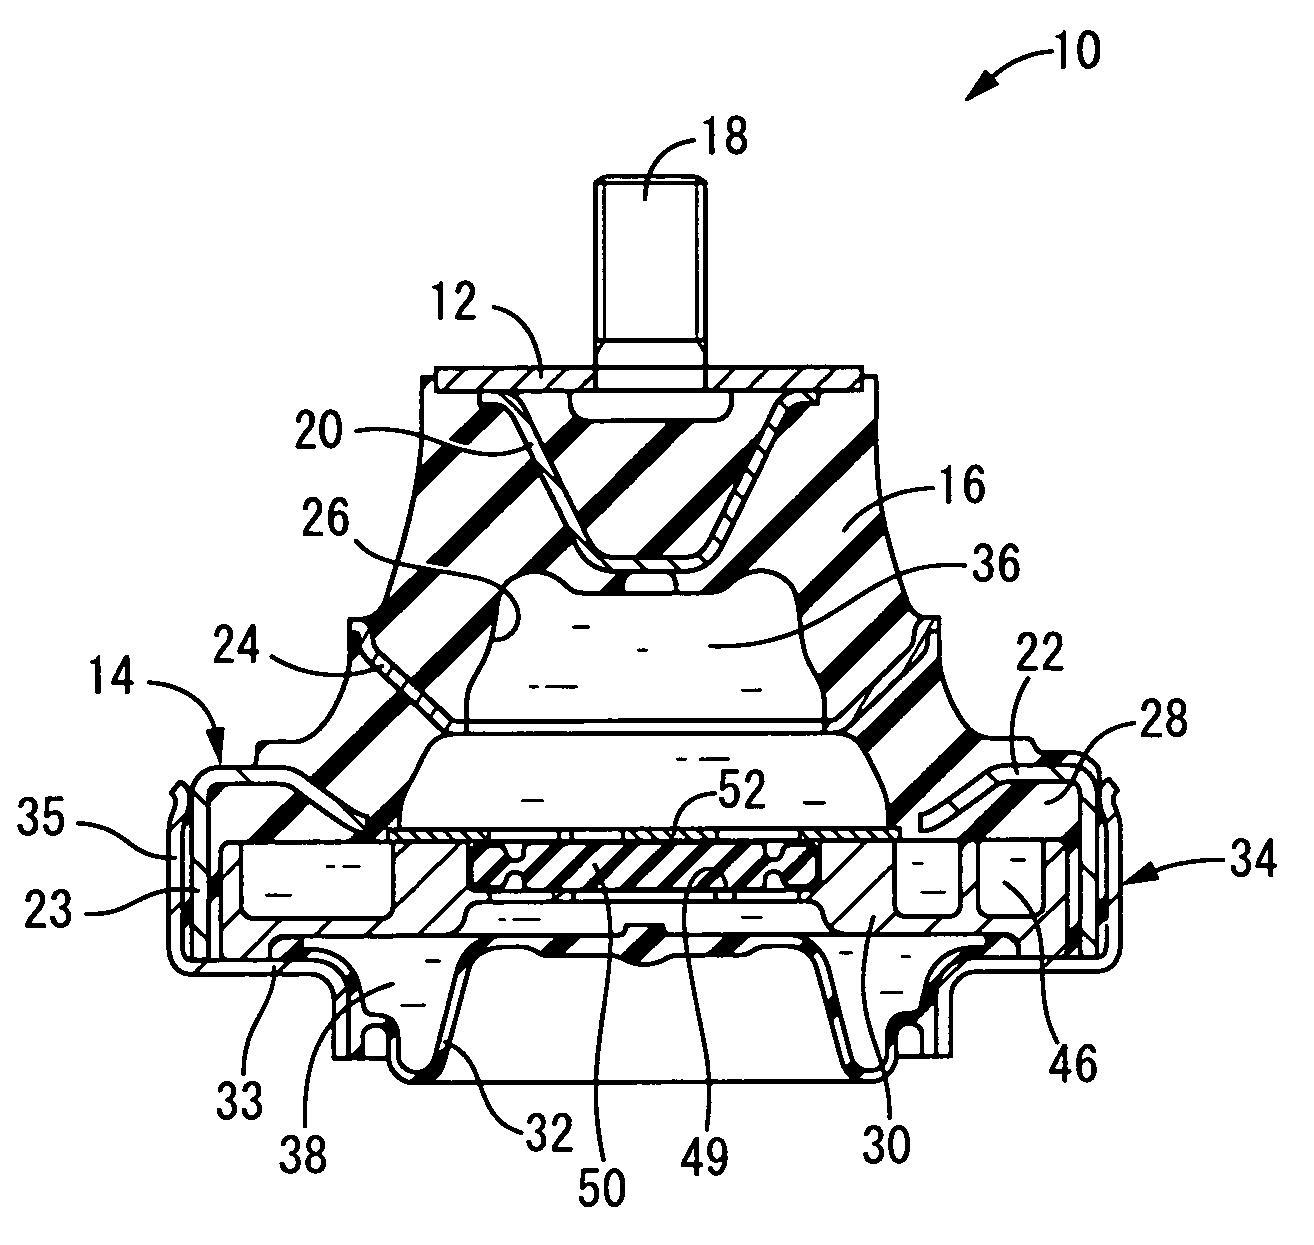 Fluid filled vibration damping device